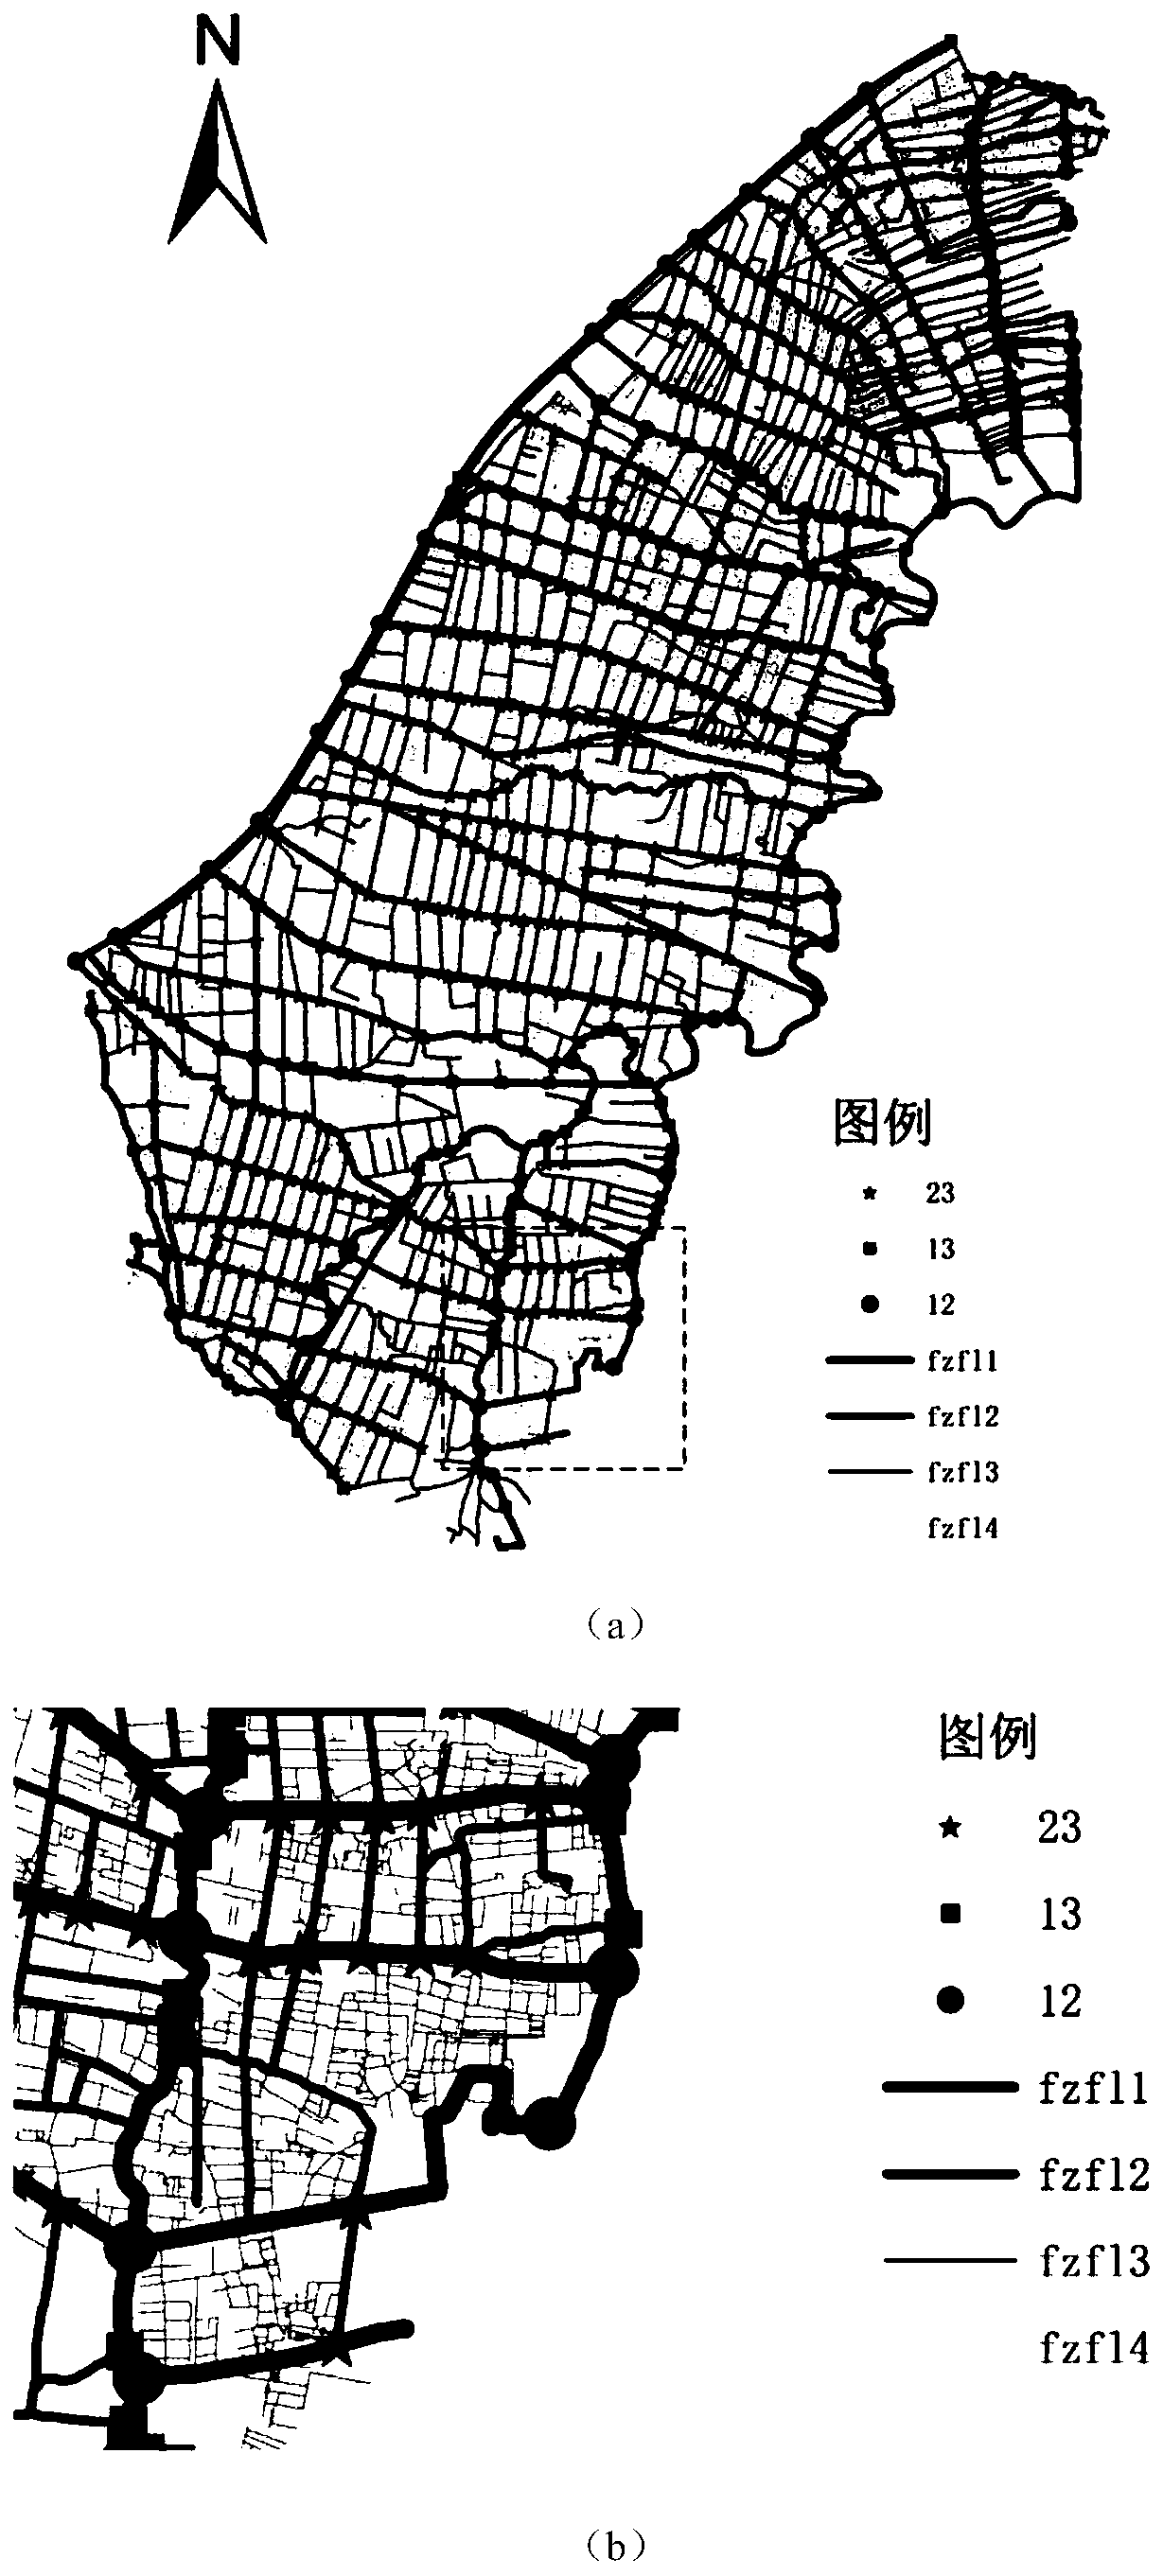 Plain irrigation district pump gate point position and type identification method based on GF-2 and Lidar data